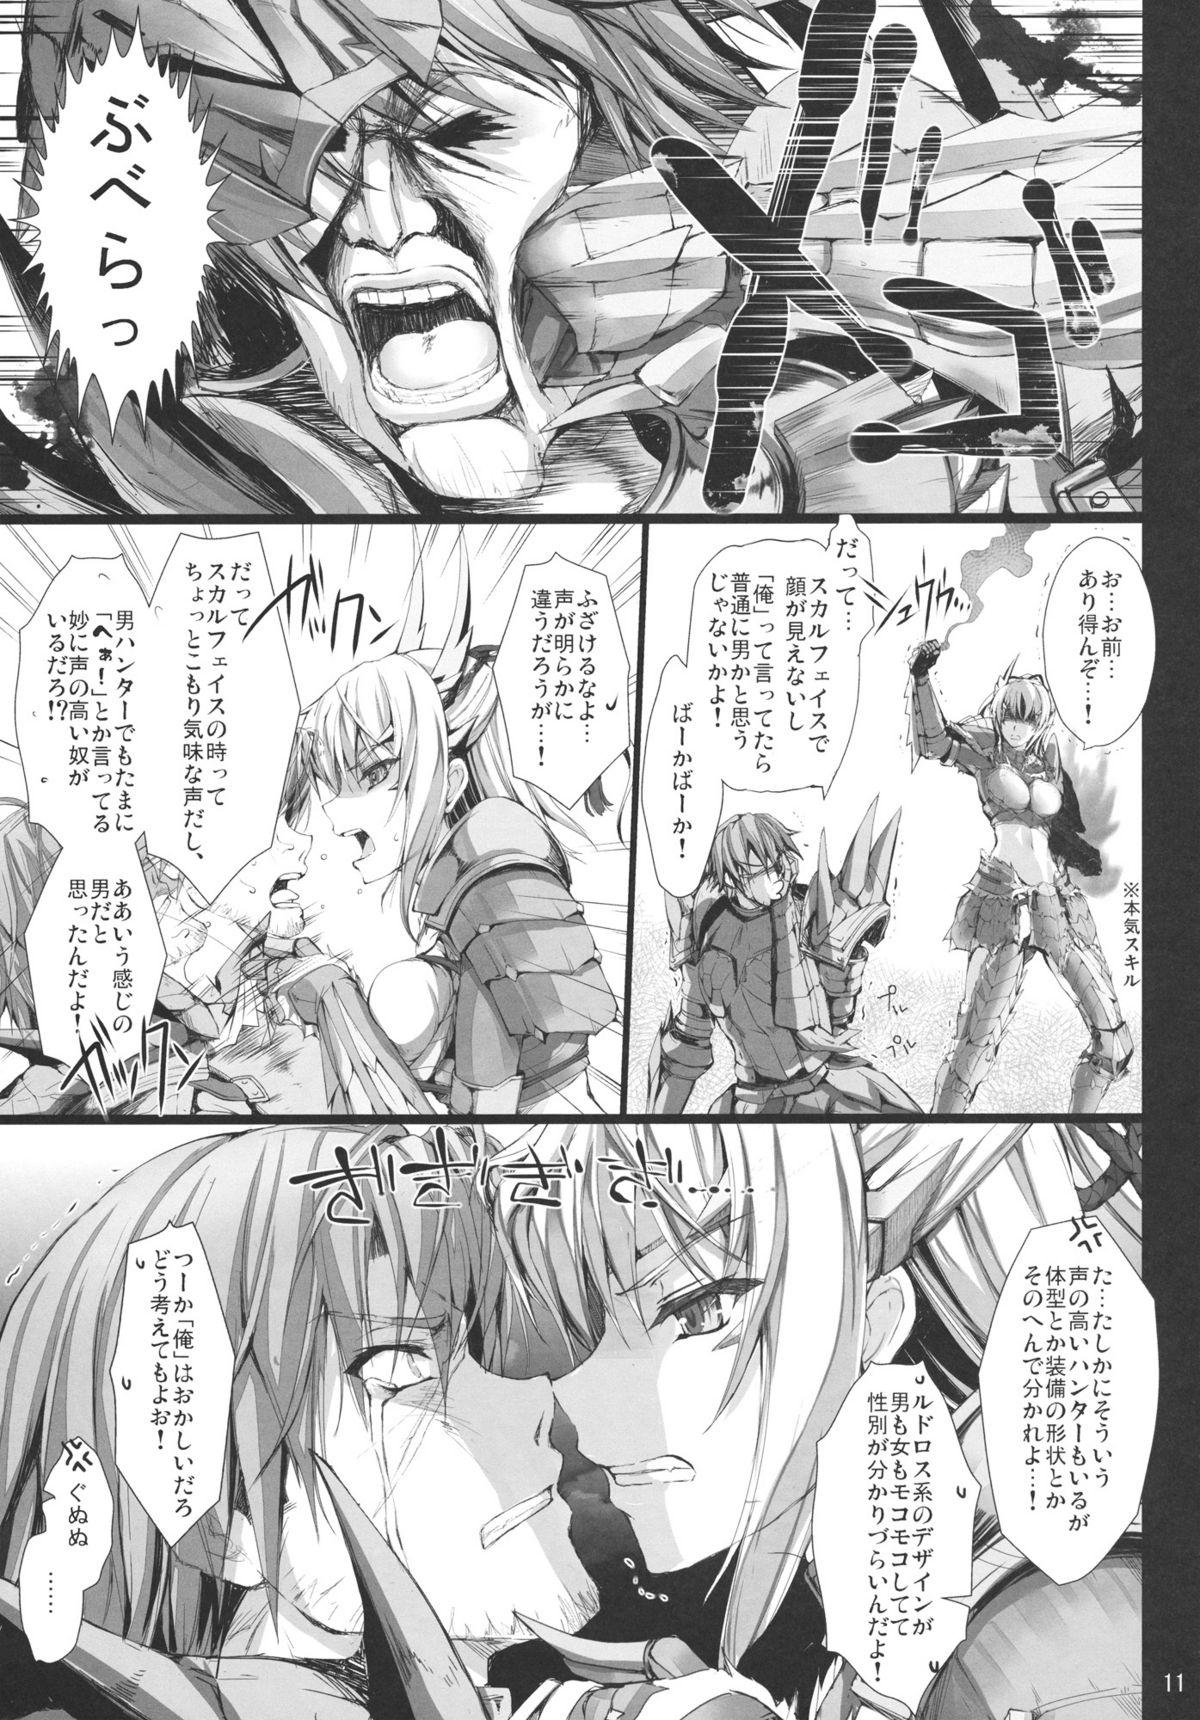 Twinks Monhan no Erohon 11 - Monster hunter Lolicon - Page 10